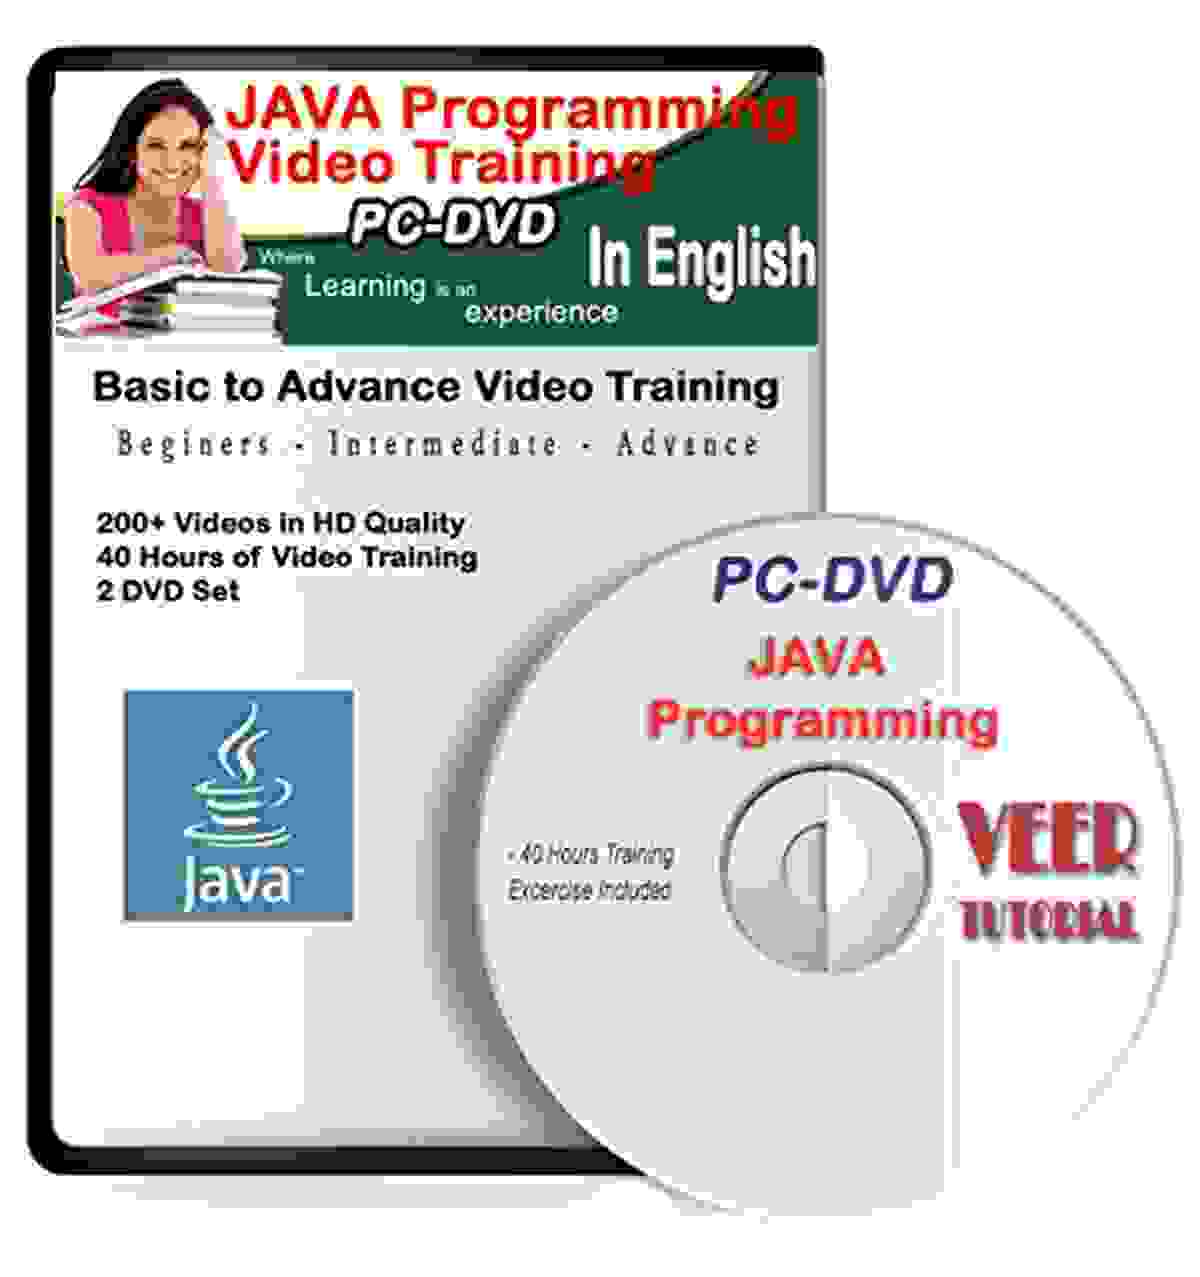 Java Programming Tutorial DVD Basic to Advance Video Training (40 hrs, 200+ Videos) Learning Video